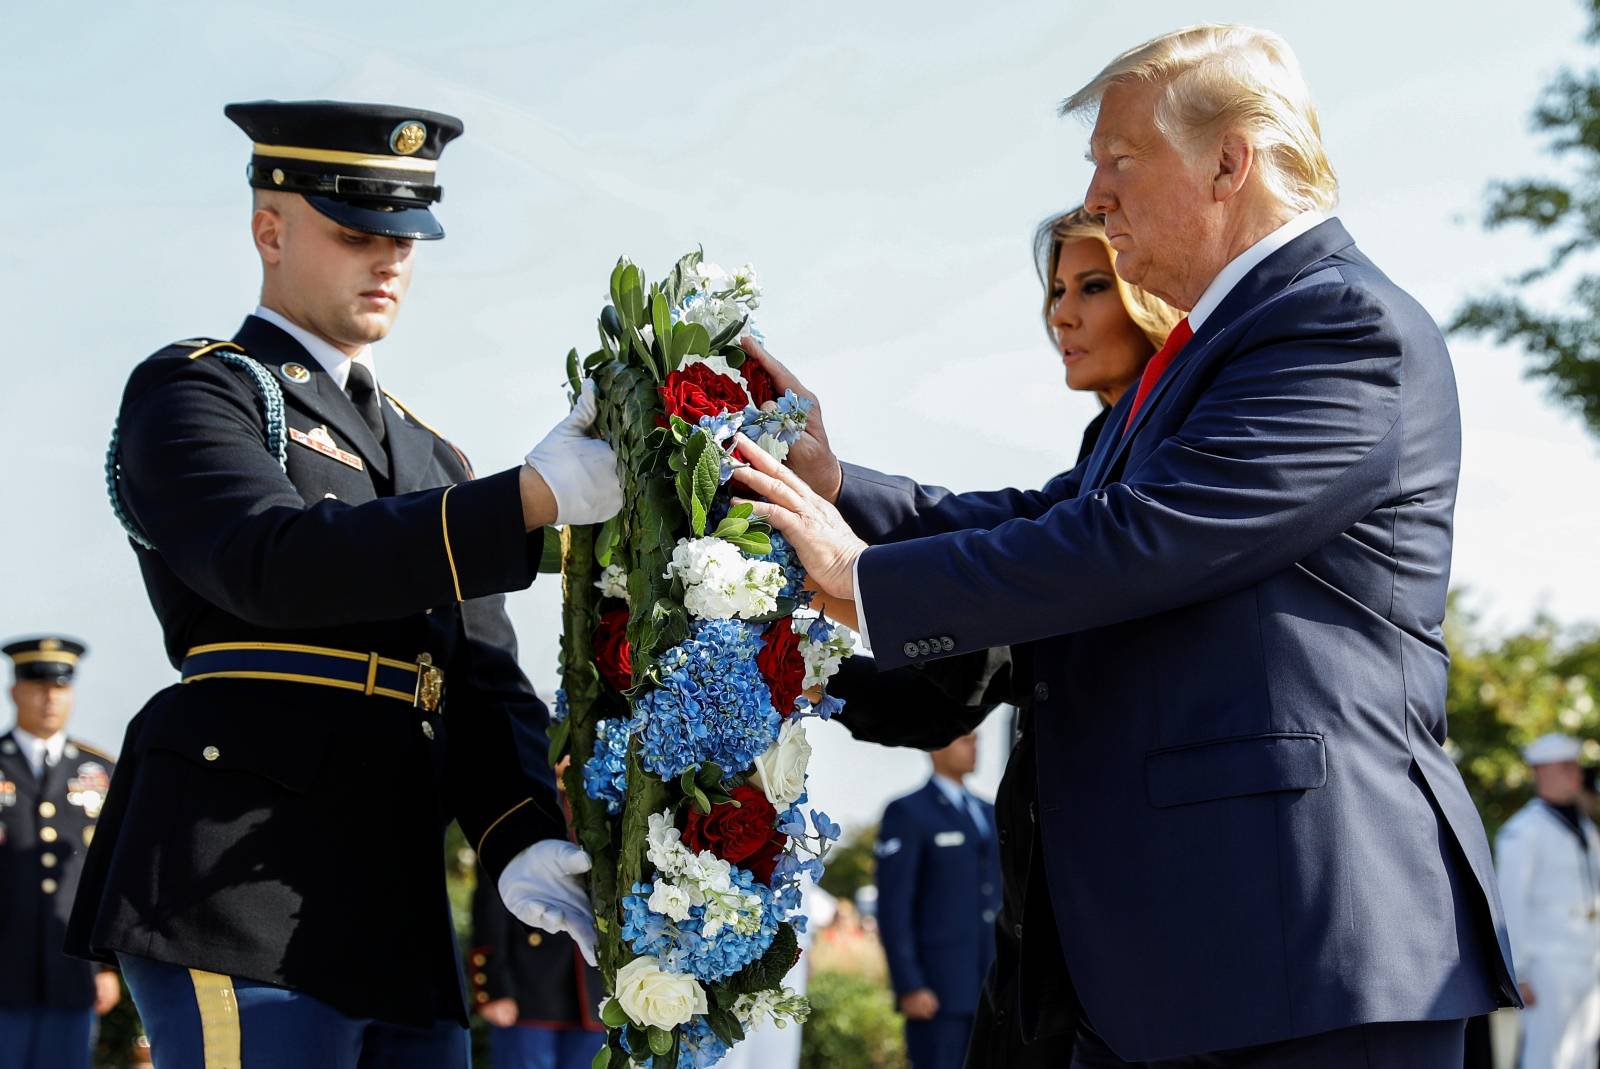 U.S. President Trump attends Pentagon ceremony to mark the 18th anniversary of September 11 attacks in Washington